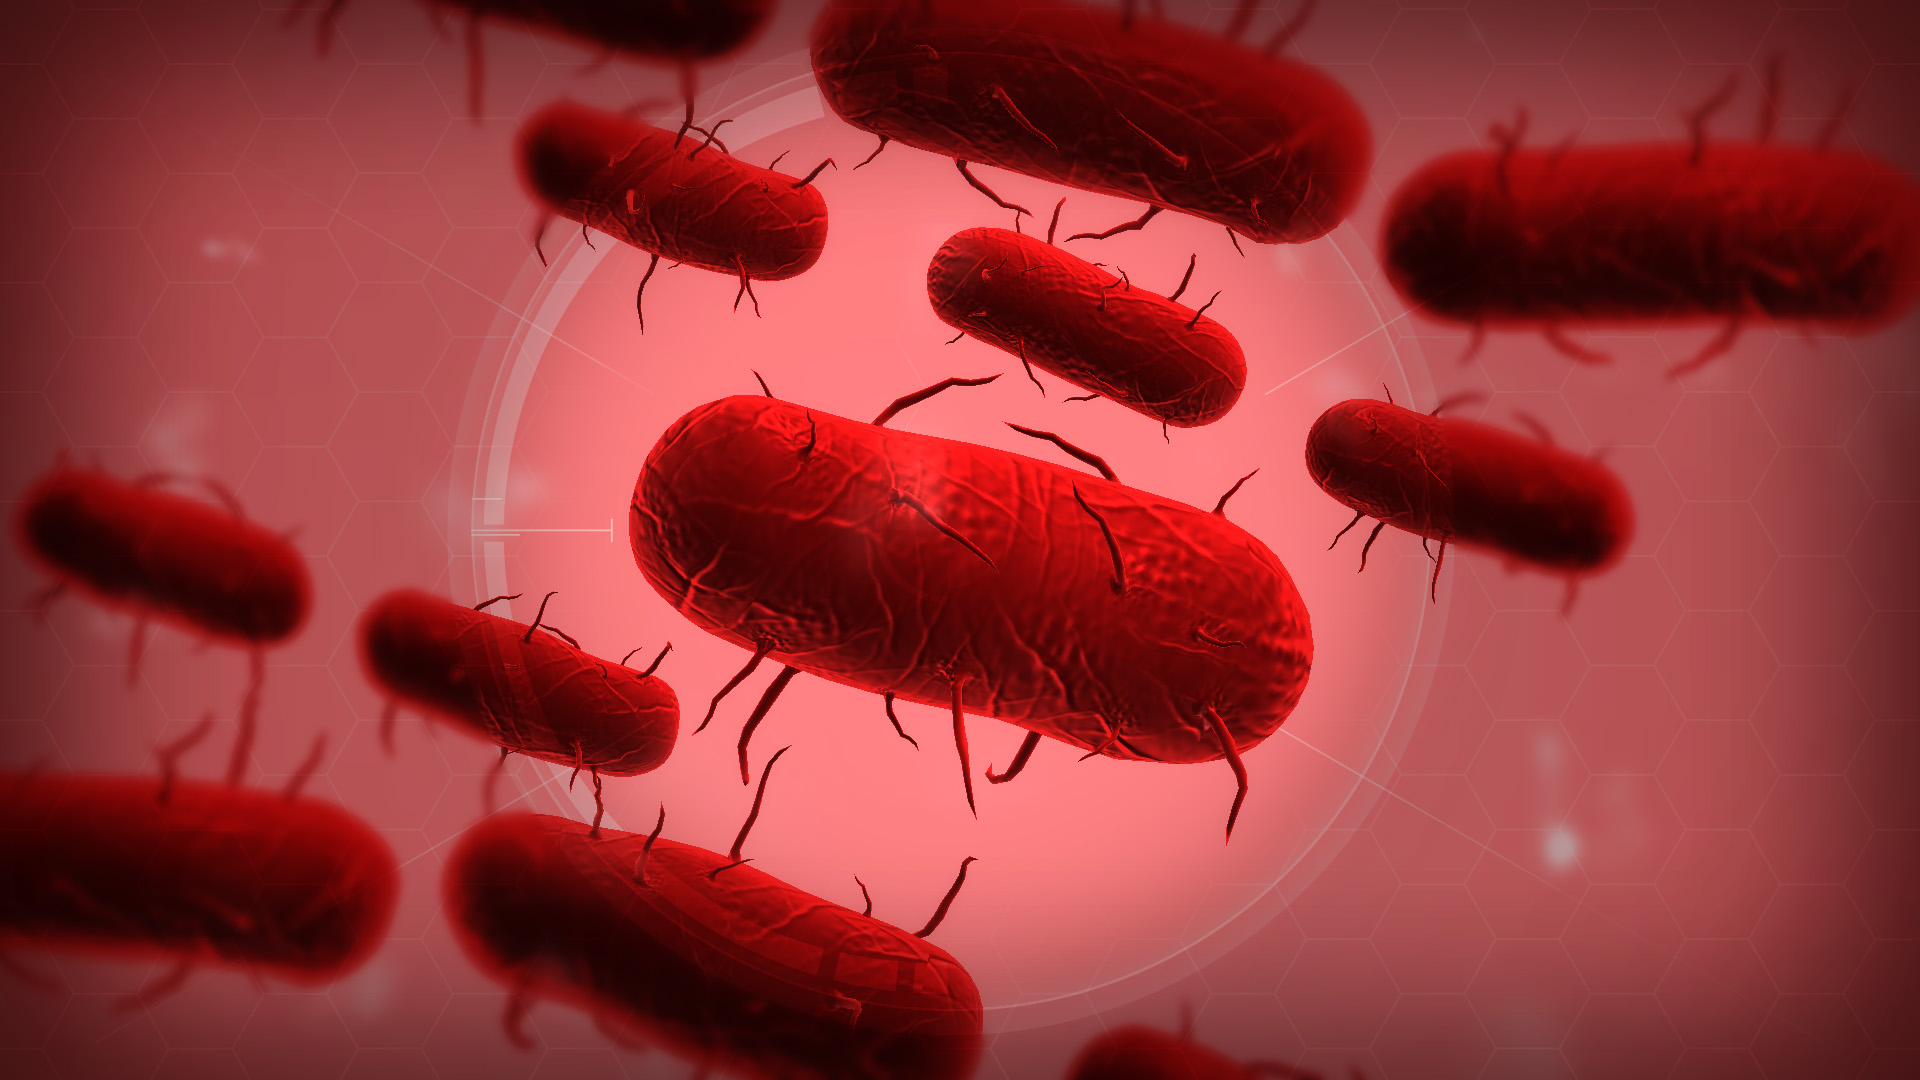 There is now a petition to include ‘anti-vaxxers’ as an added force in Plague Inc.